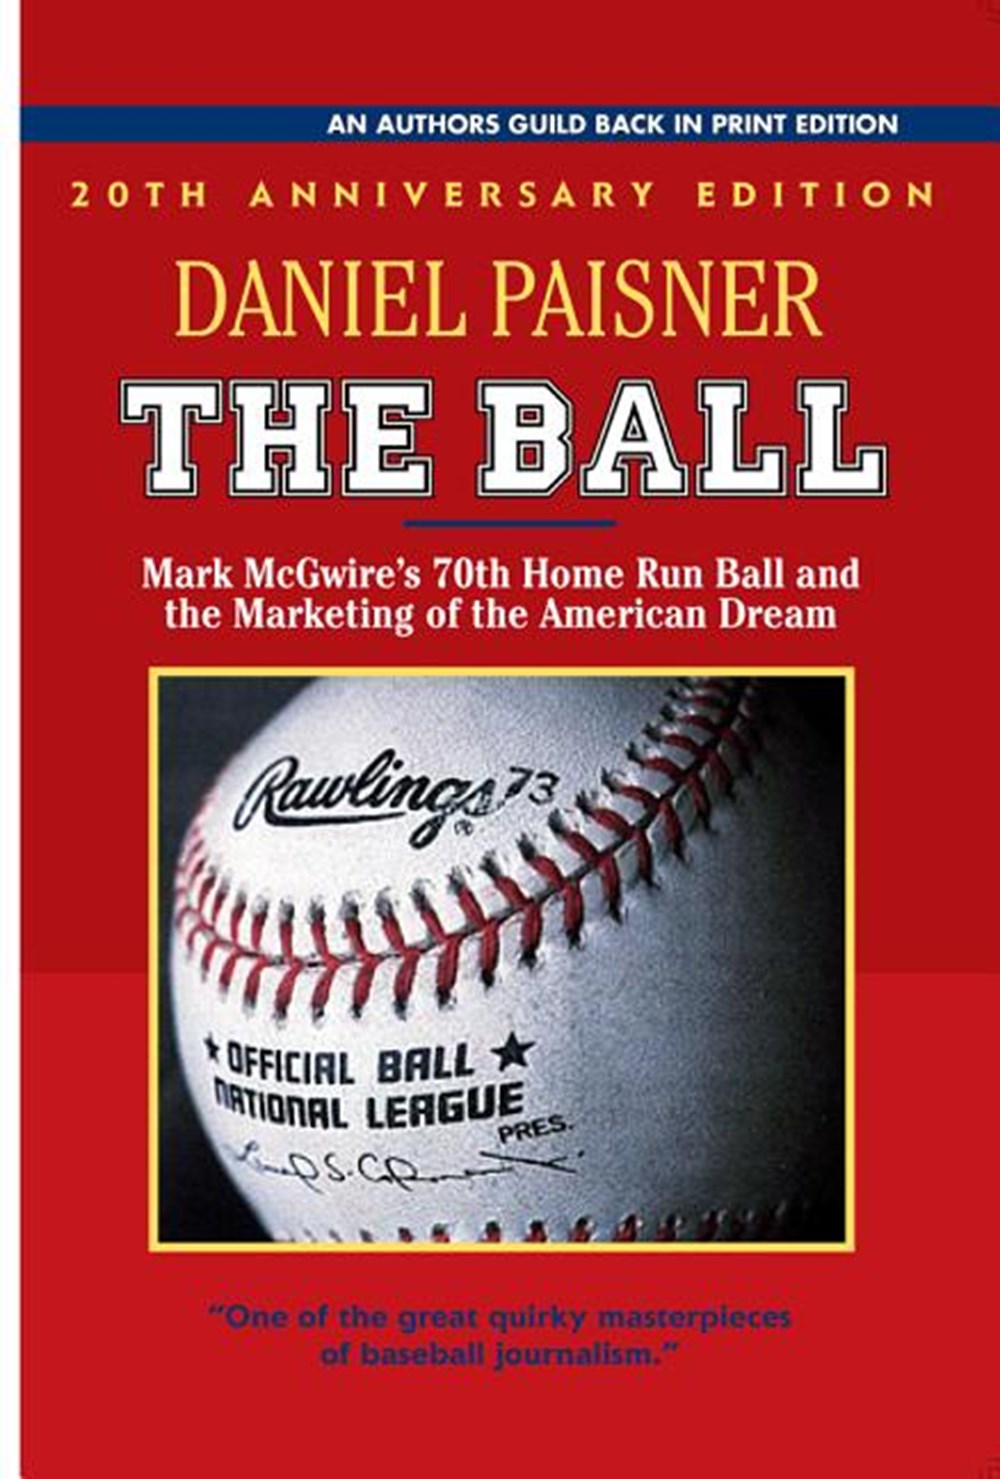 Ball: Mark McGwire's 70th Home Run Ball and the Marketing of the American Dream